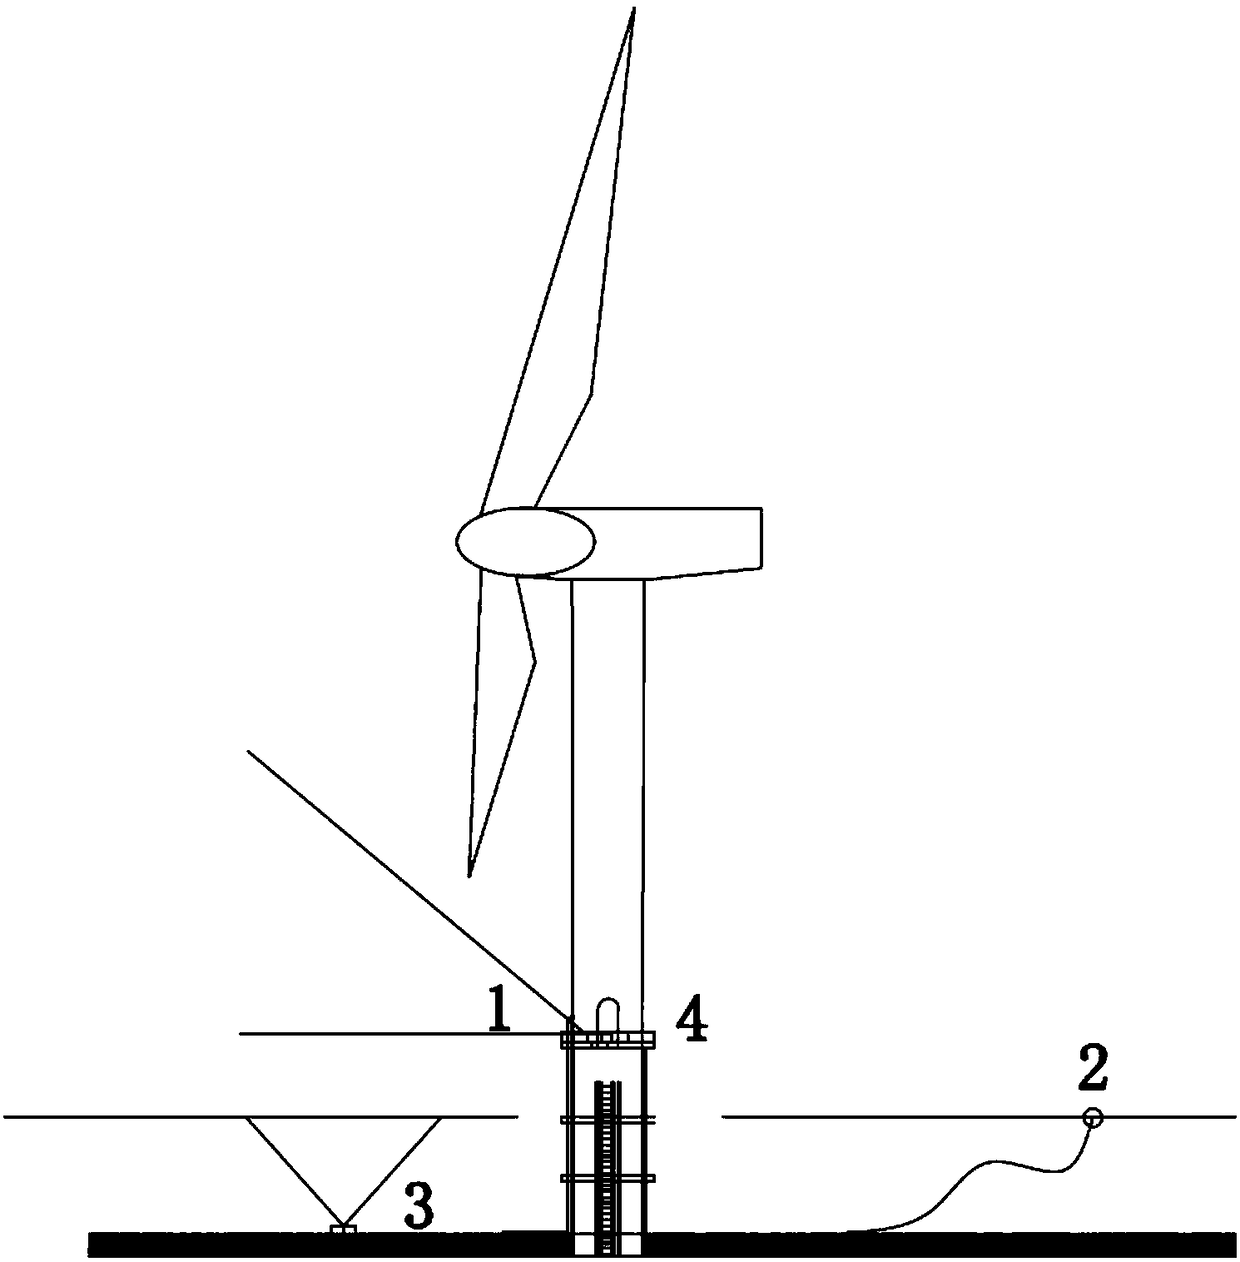 Offshore wind turbine environment parameter test device